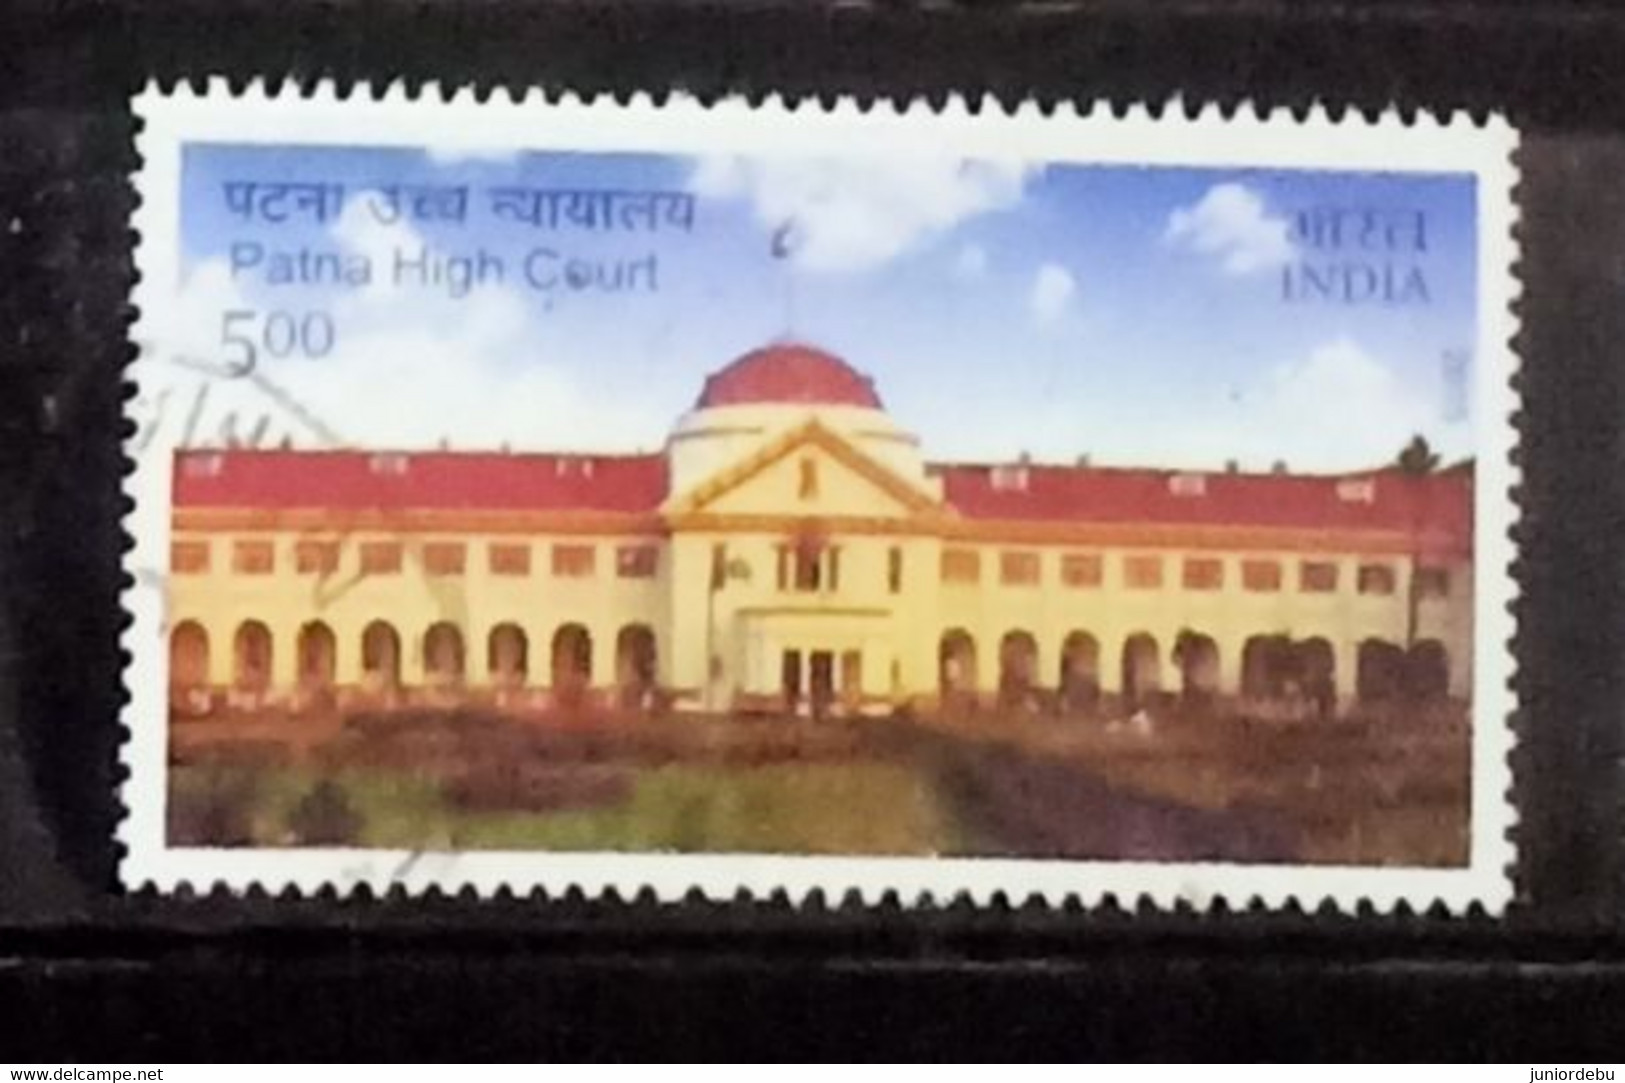 India - 2015 -  Patna High Court   - Used. Condition As Per Scan. - Gebraucht